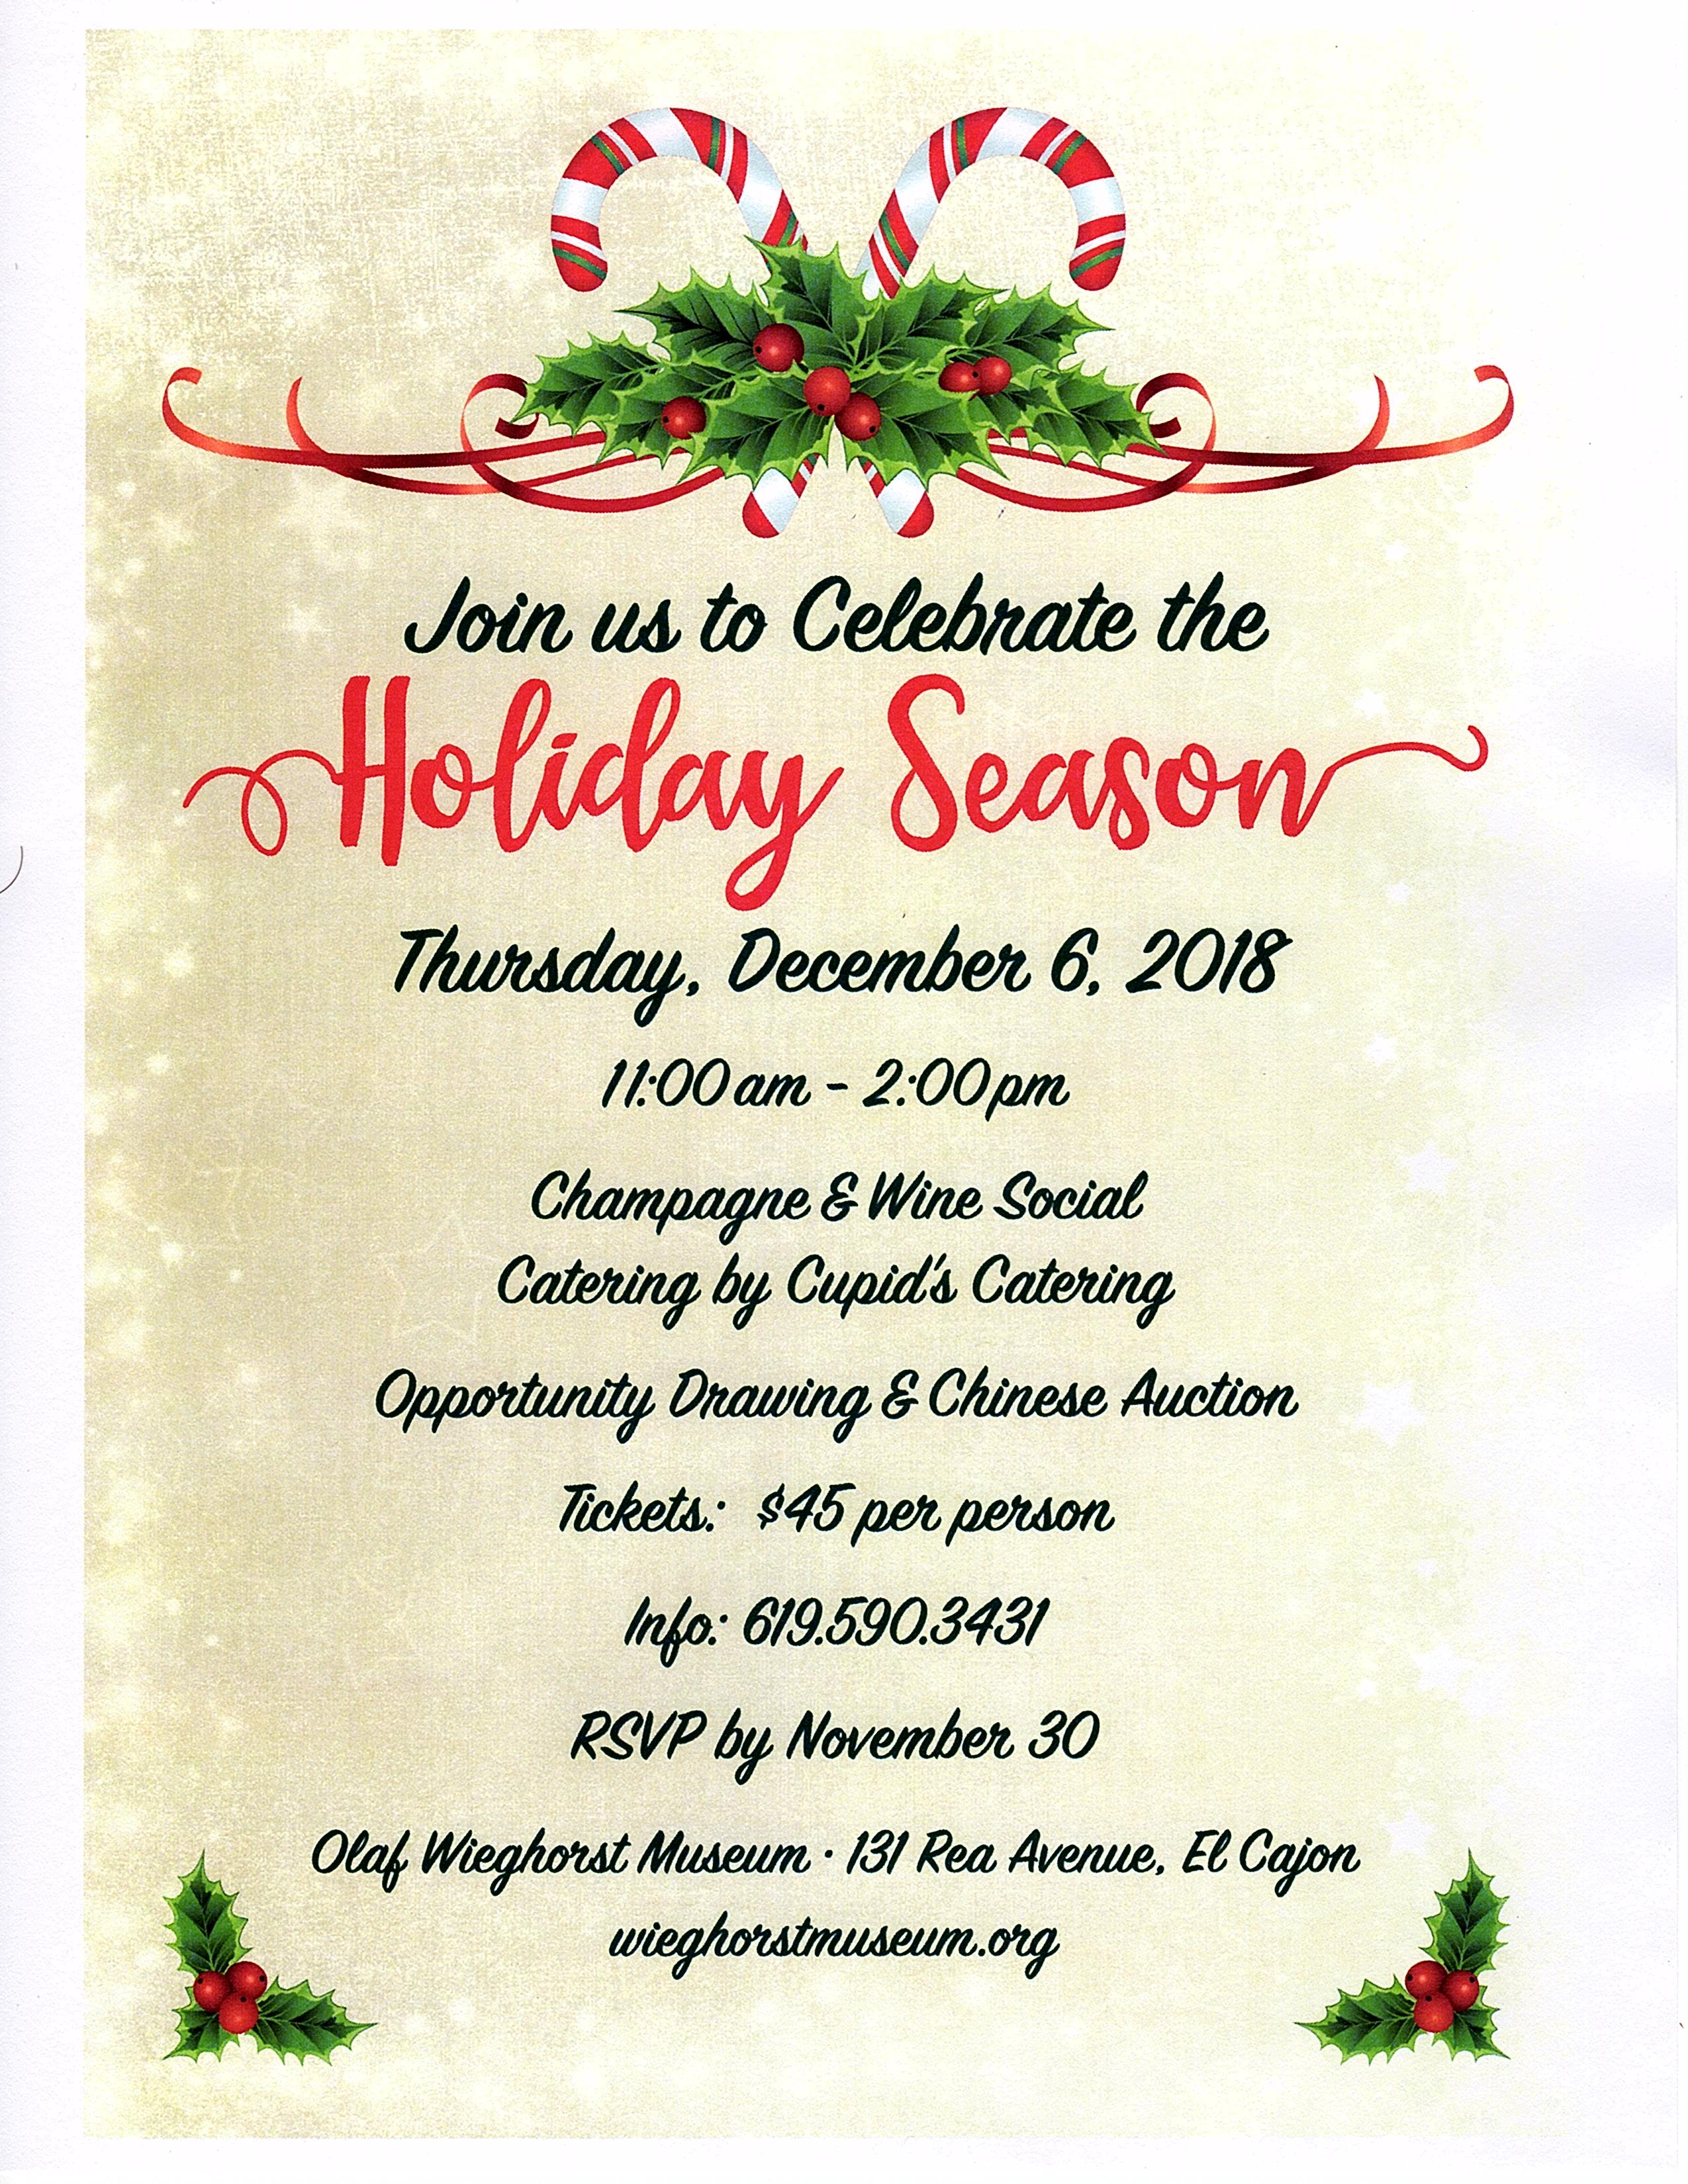 The Holiday Luncheon - Tickets are available online at the website shop ...